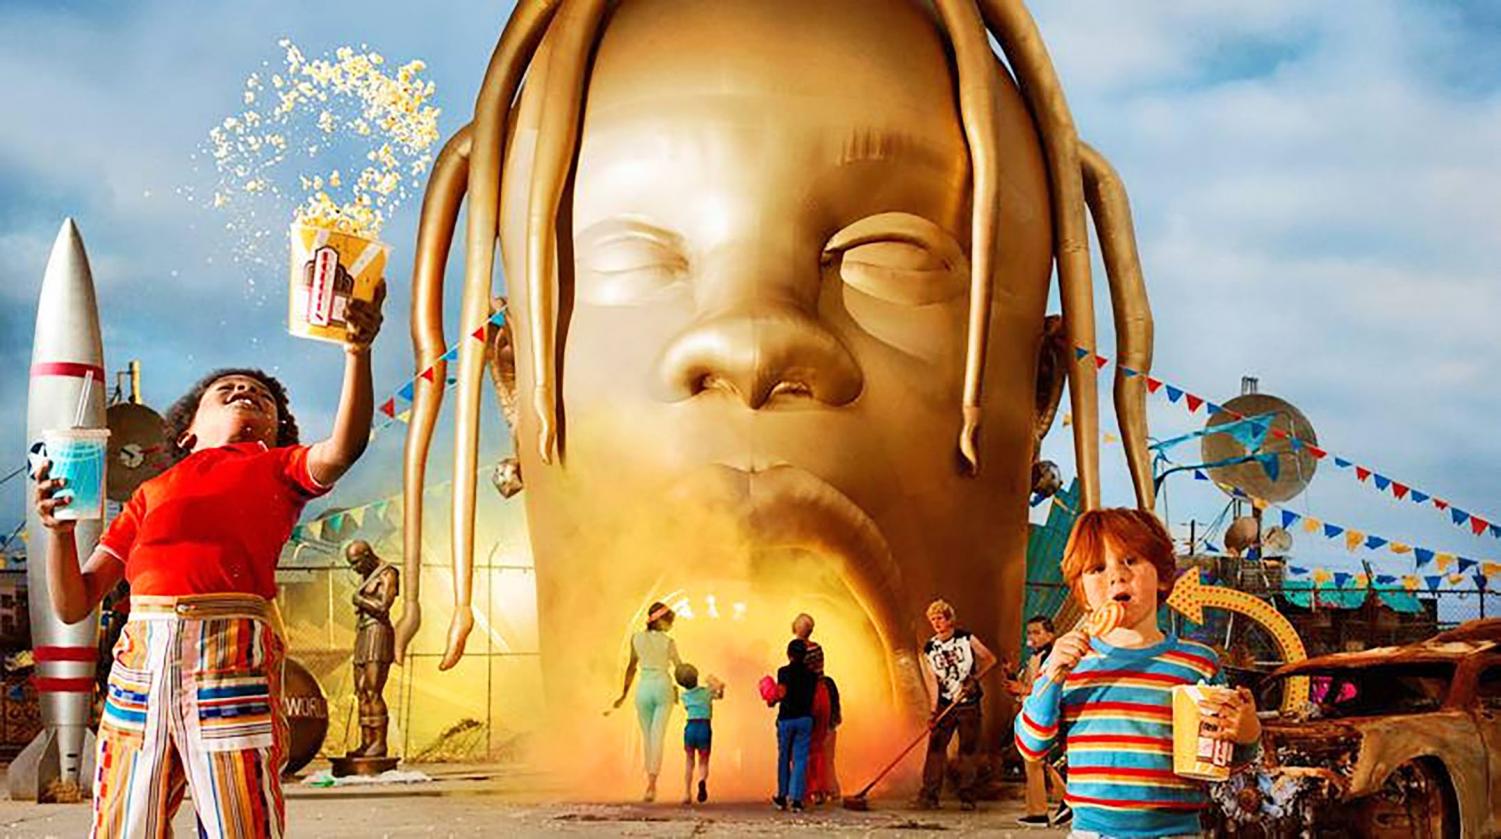 Psychedelic aesthetic, features thrive in ‘Astroworld’